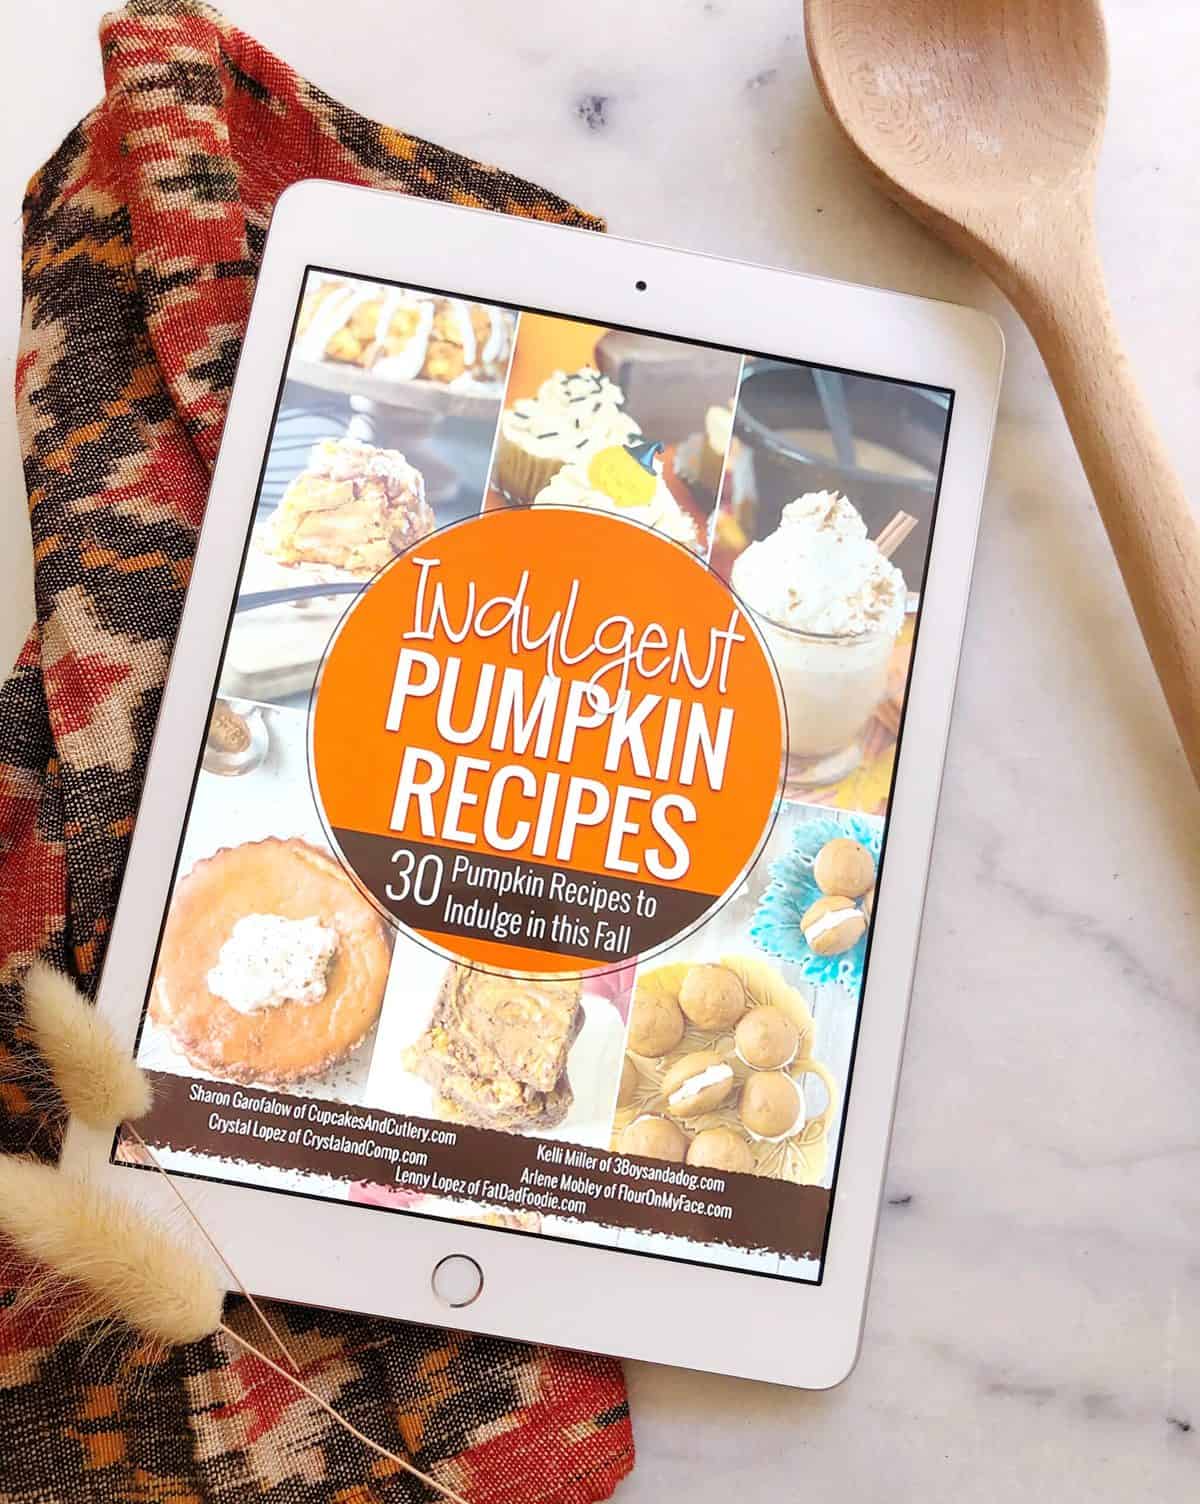 Ipad on a table with a digital pumpkin recipe book lying on a cutting board next to a wooden spoon.